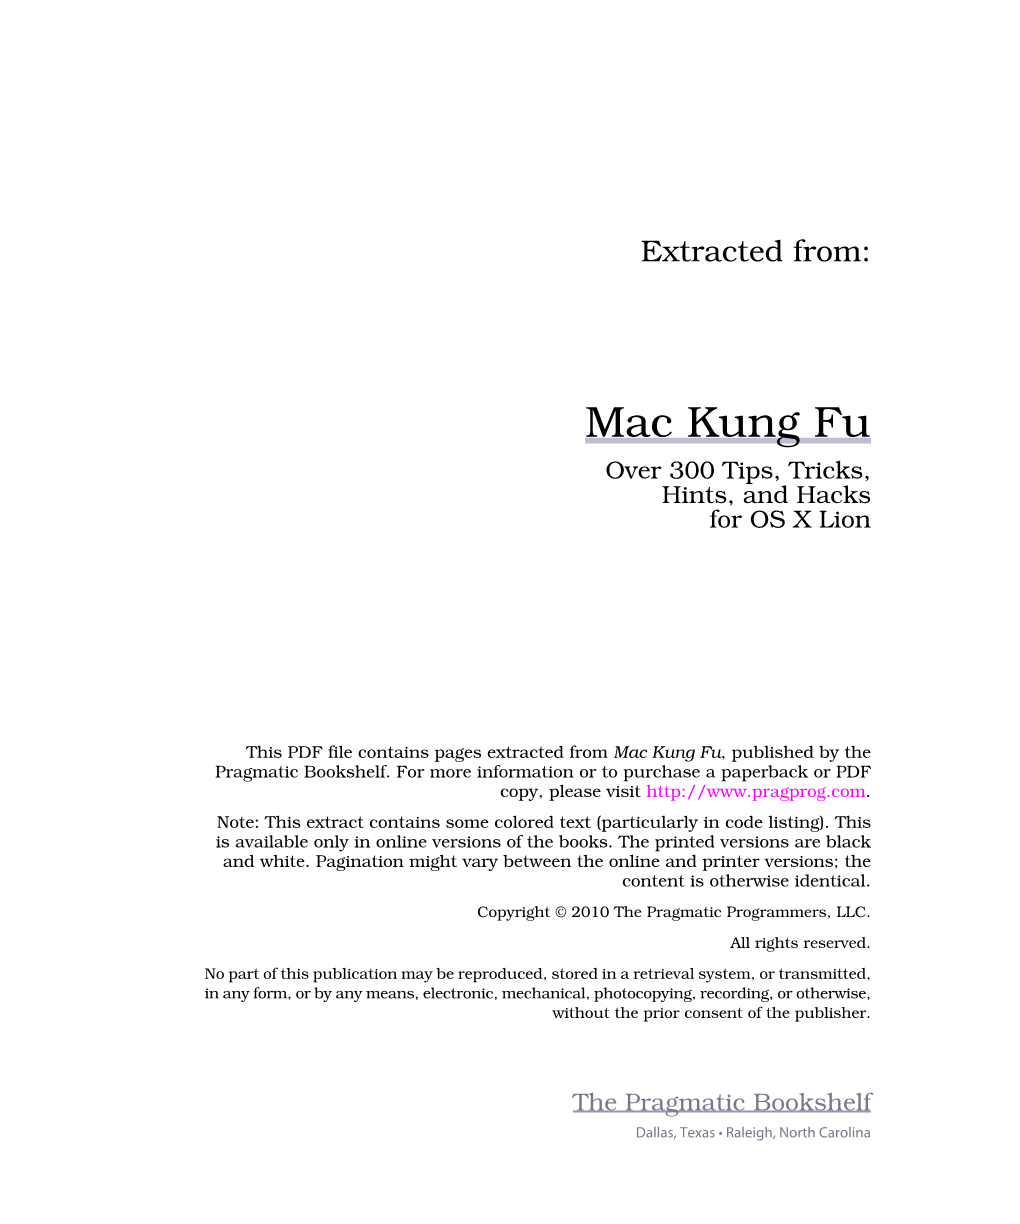 Mac Kung Fu Over 300 Tips, Tricks, Hints, and Hacks for OS X Lion